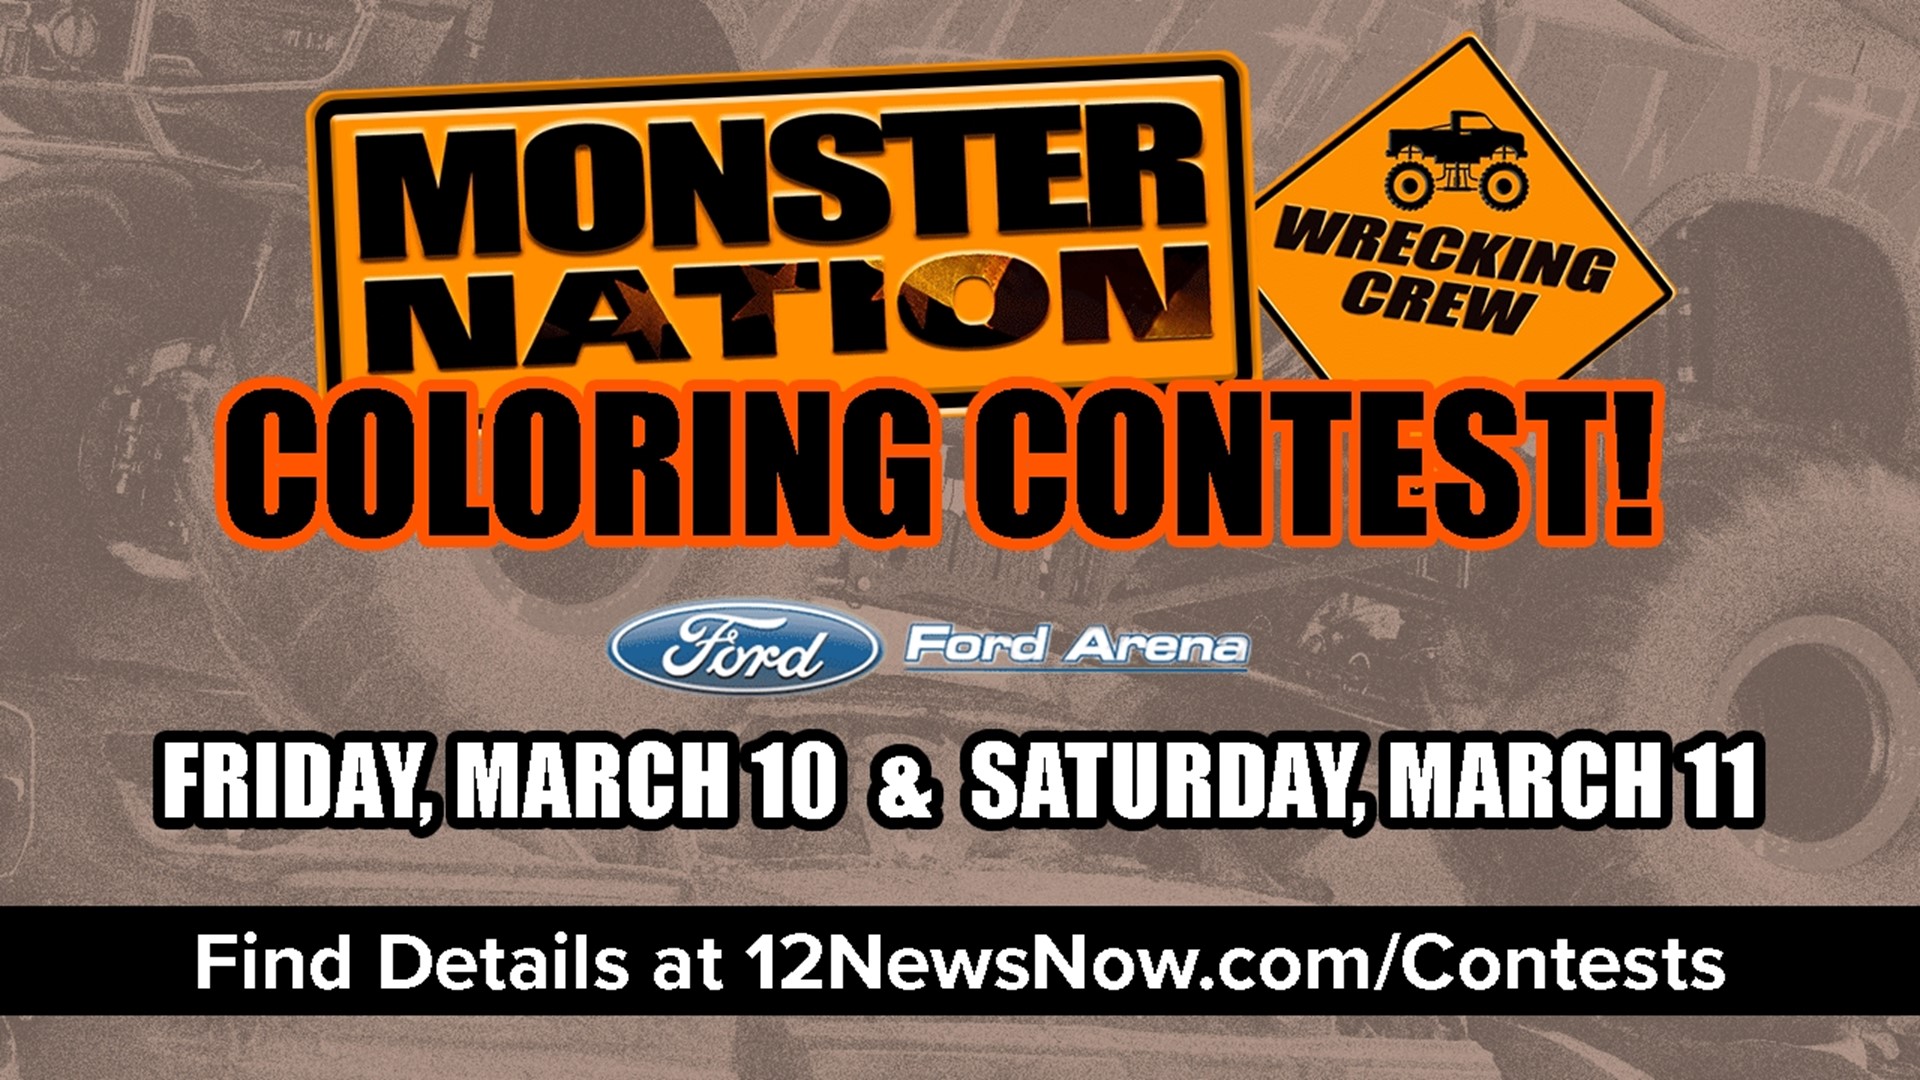 Get the crayons out and download your Monster Nation Wrecking Crew coloring sheet for a chance to win!